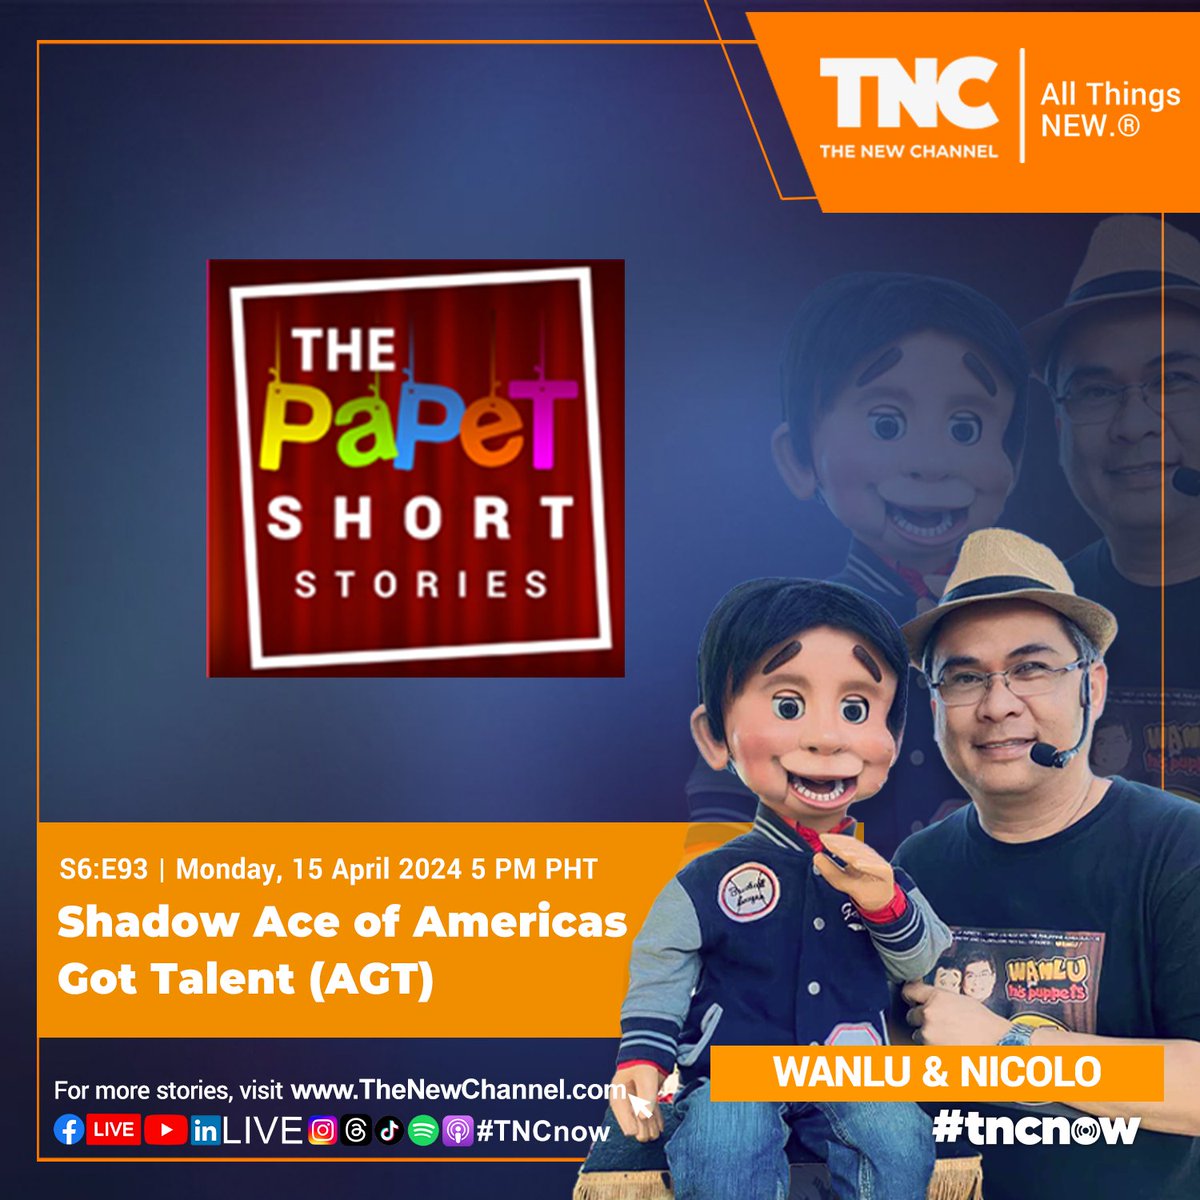 Watch S6:E93 | Shadow Ace of Americas Got Talent (AGT) | The Papet Short Stories with Tito Wanlu and Nicolo

YouTube - bit.ly/ThePapetShortS…

#onTNC #TNCnow #ThePapetShortStoriesOnTNC #fypシ #ForYouPage #WatchTNCNow #TNCTheNewChannel #AllThingsNEW